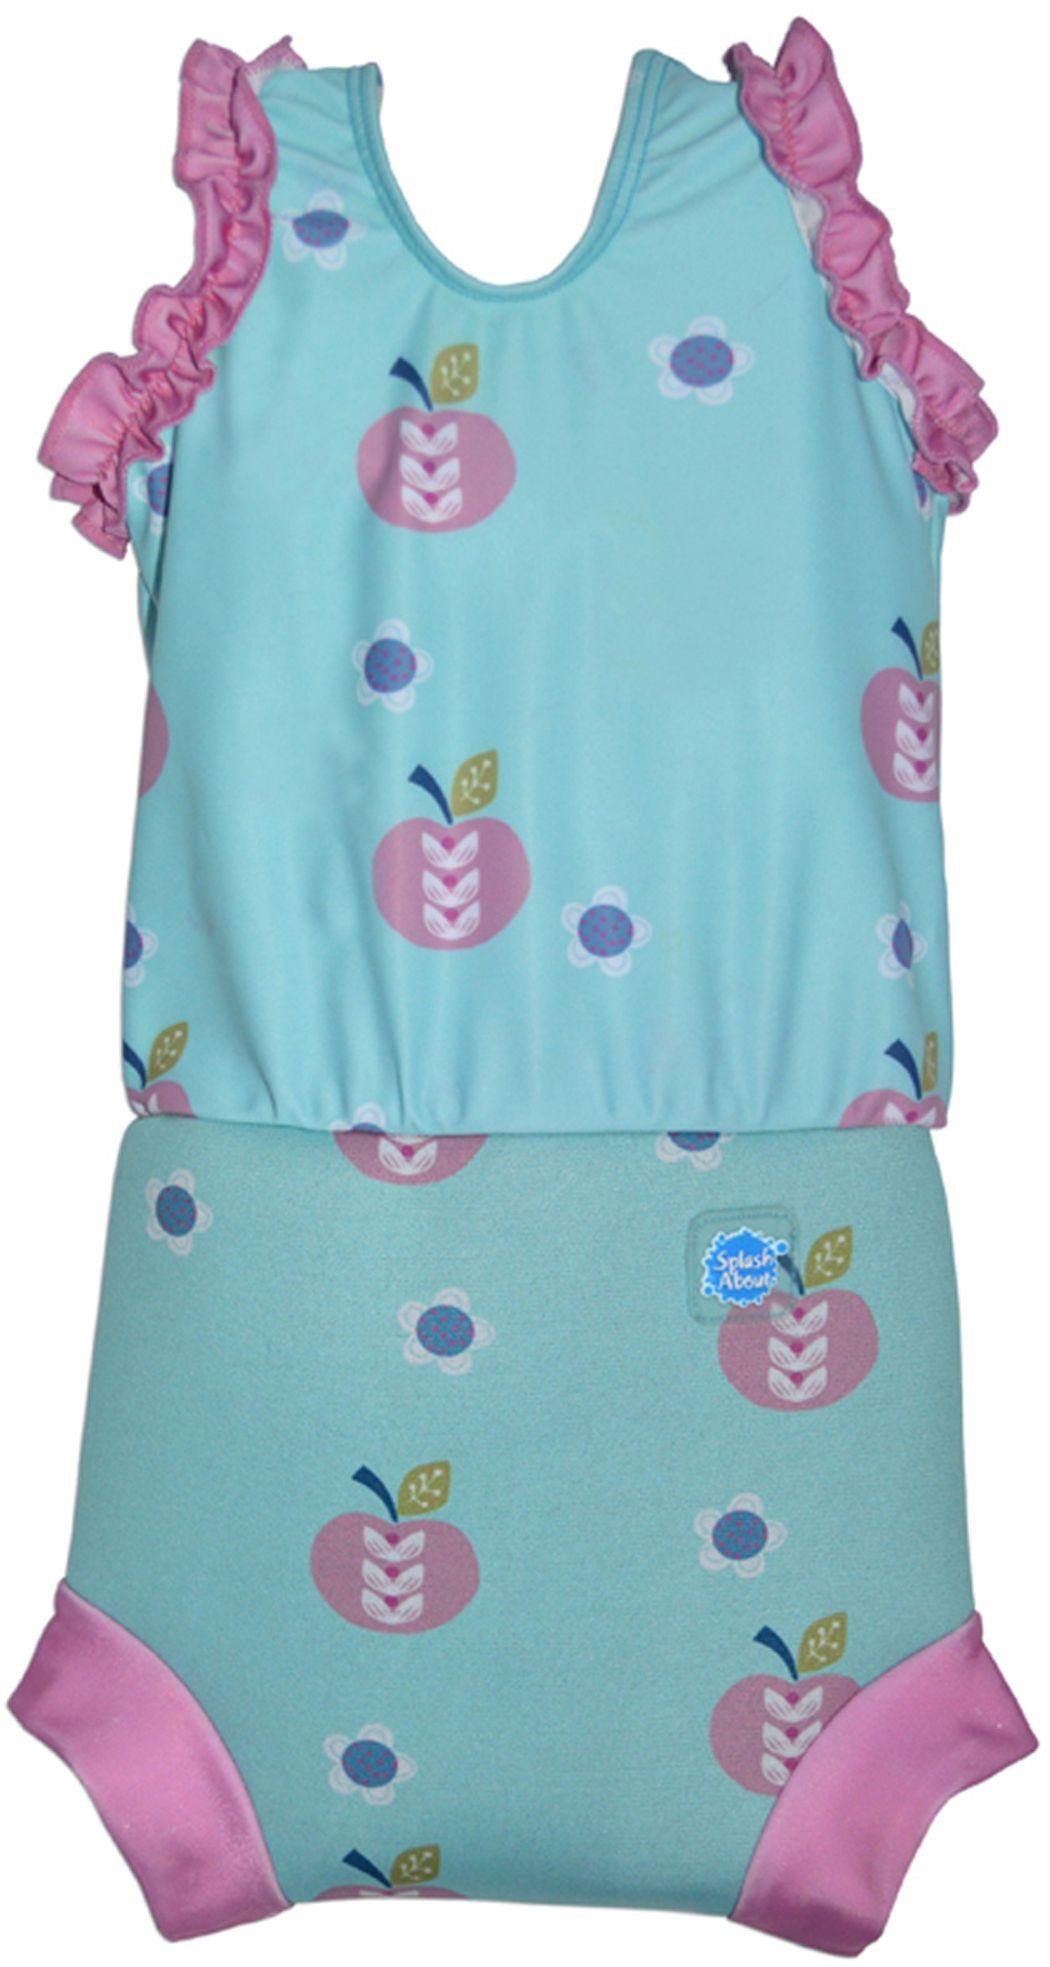 Splash About Happy Nappy Costume XL 12-24 months Apple Daisy Review